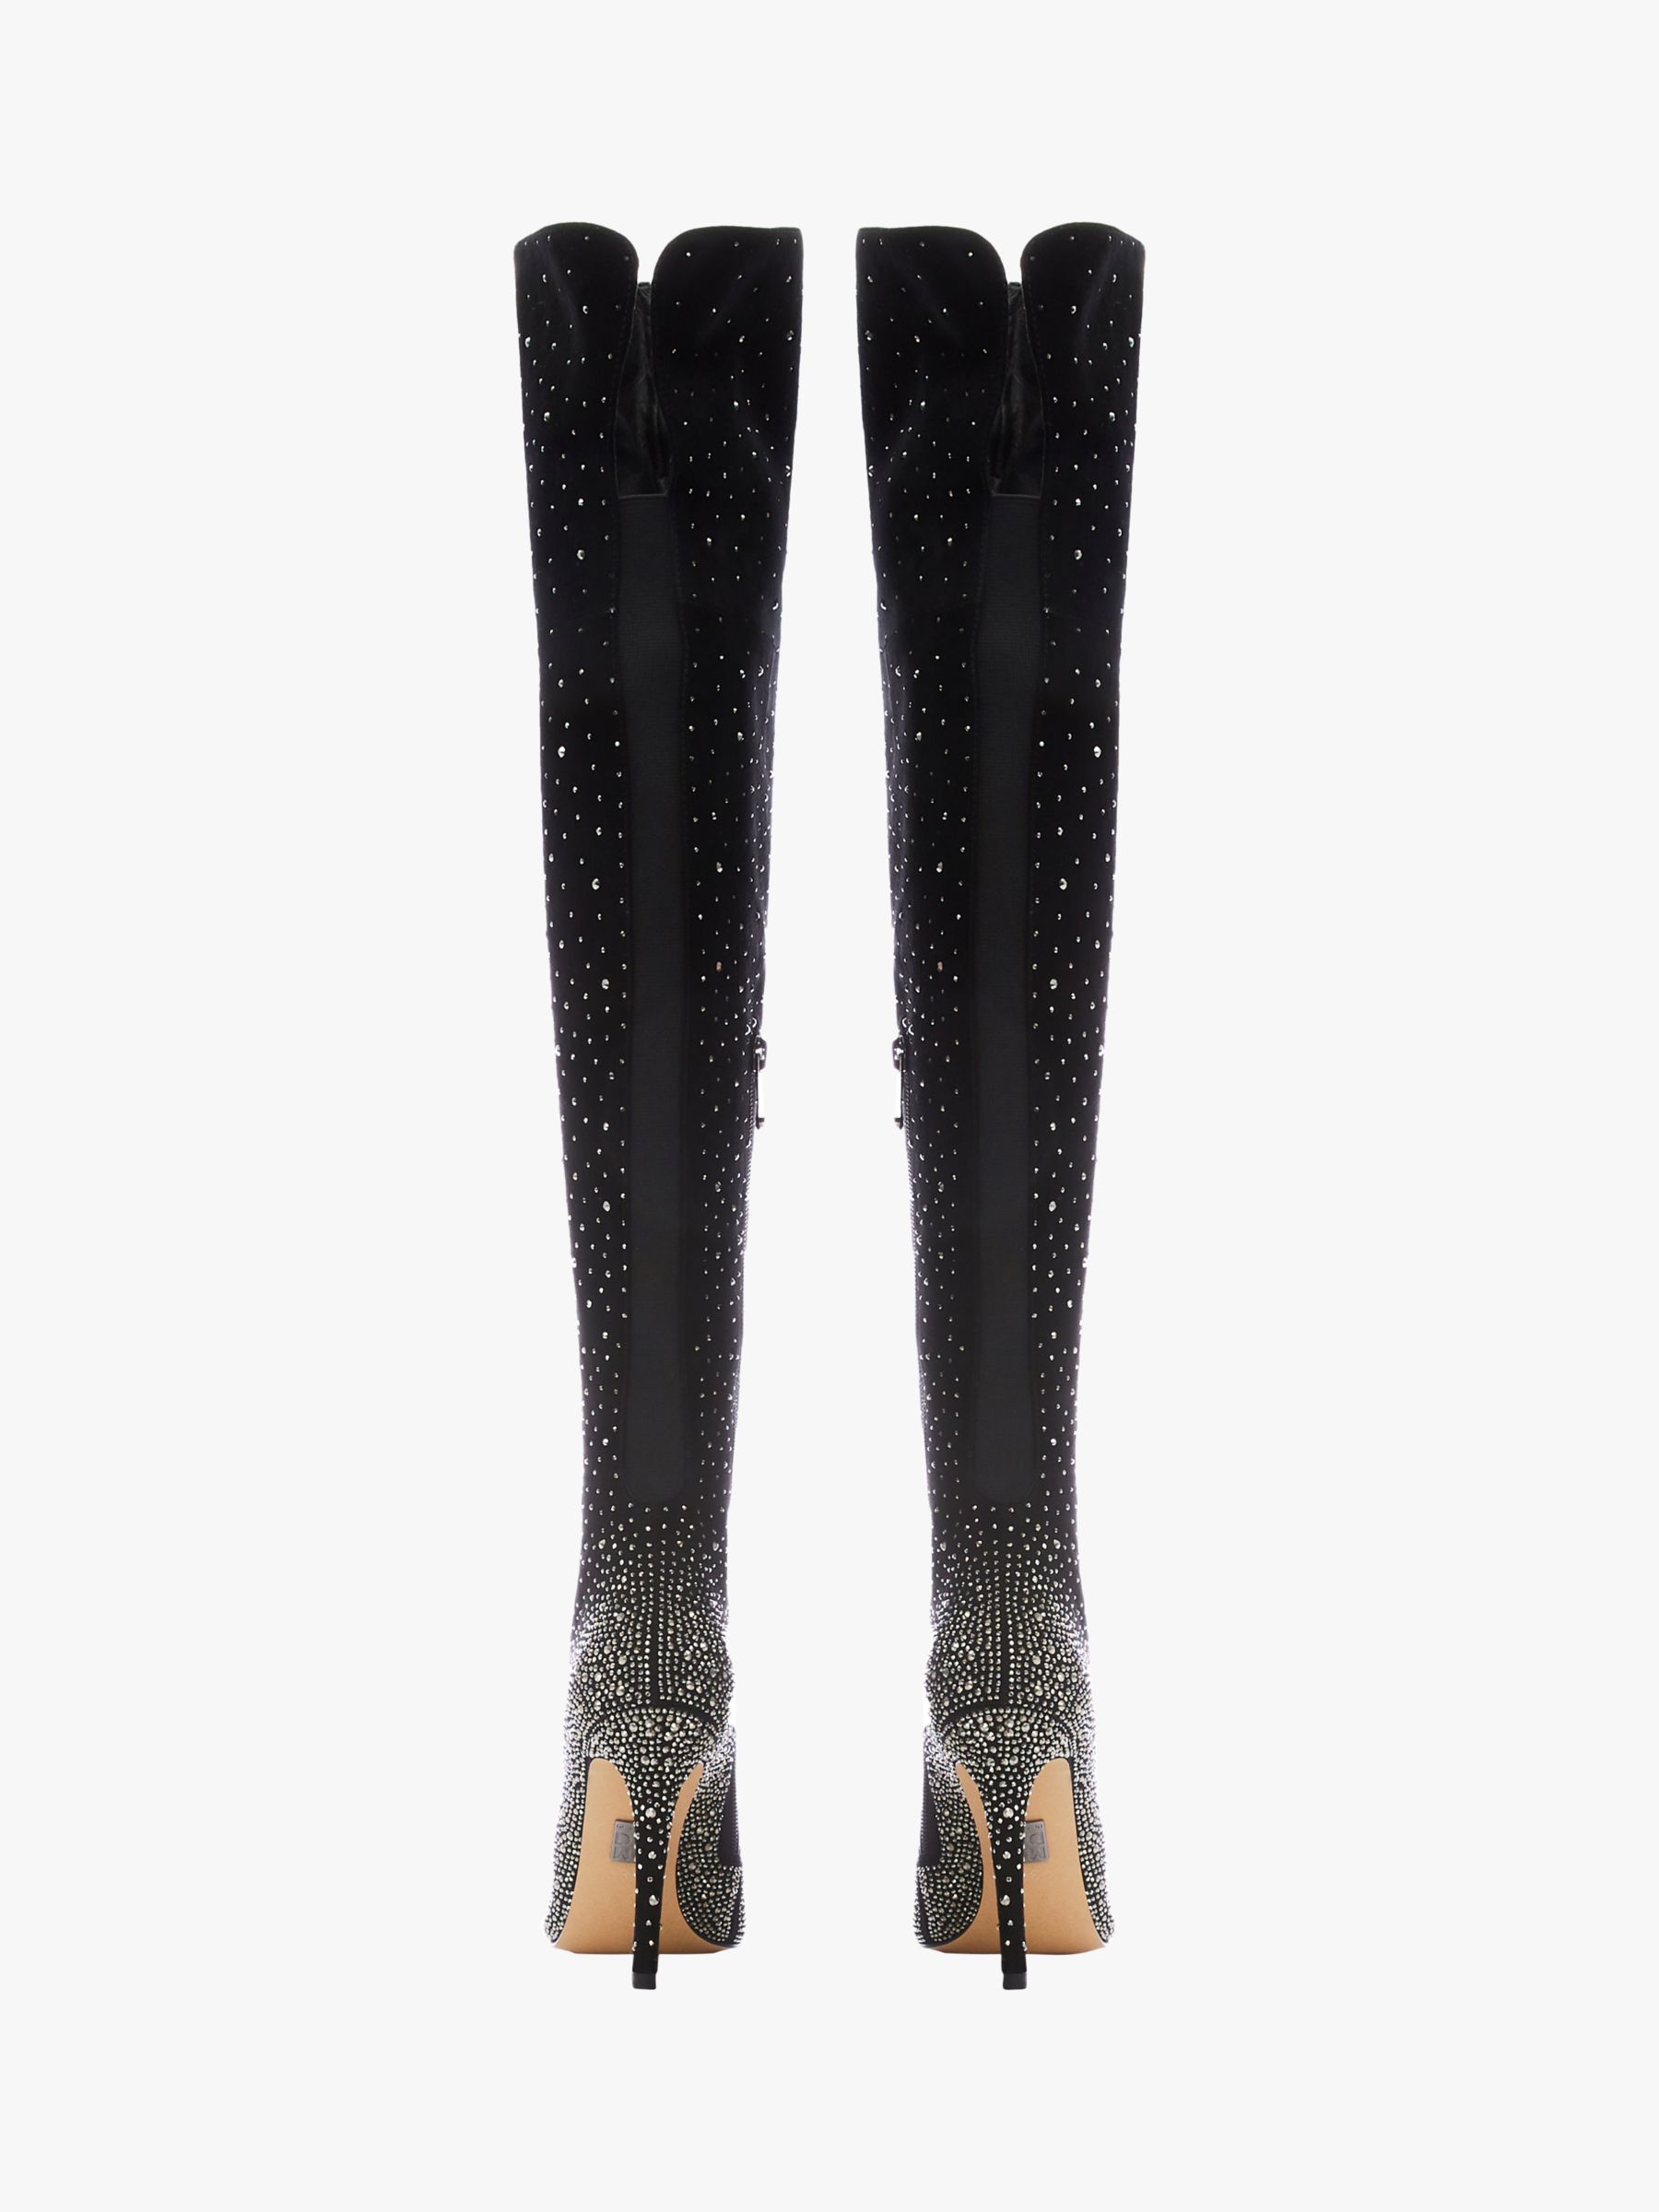 Moda in Pelle Yesenia Suede Diamante Embellished Over The Knee Boots, Black, 3